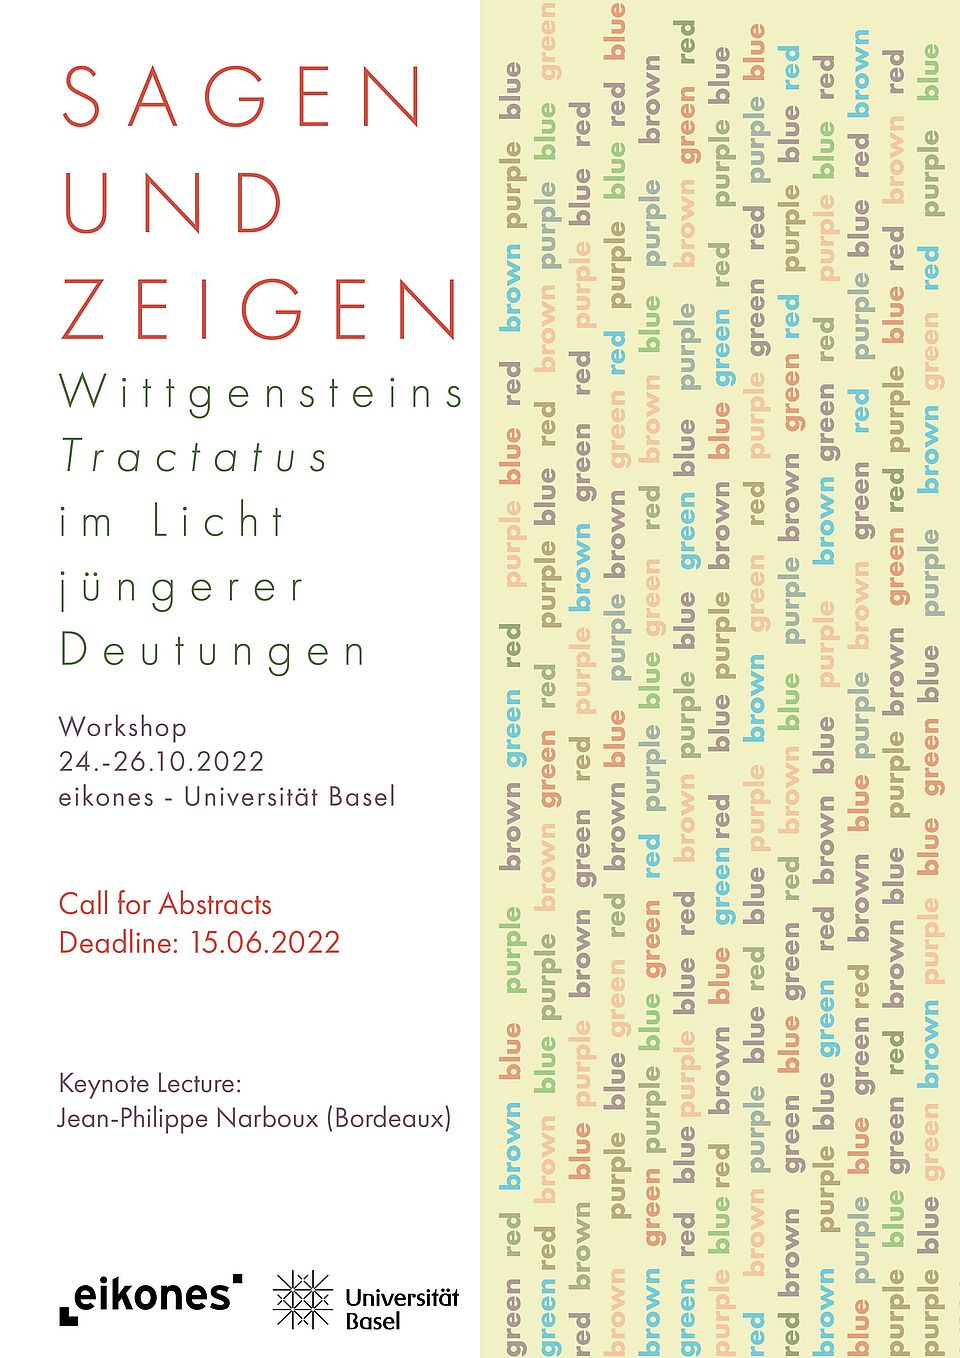 Call for Abstracts deutsch